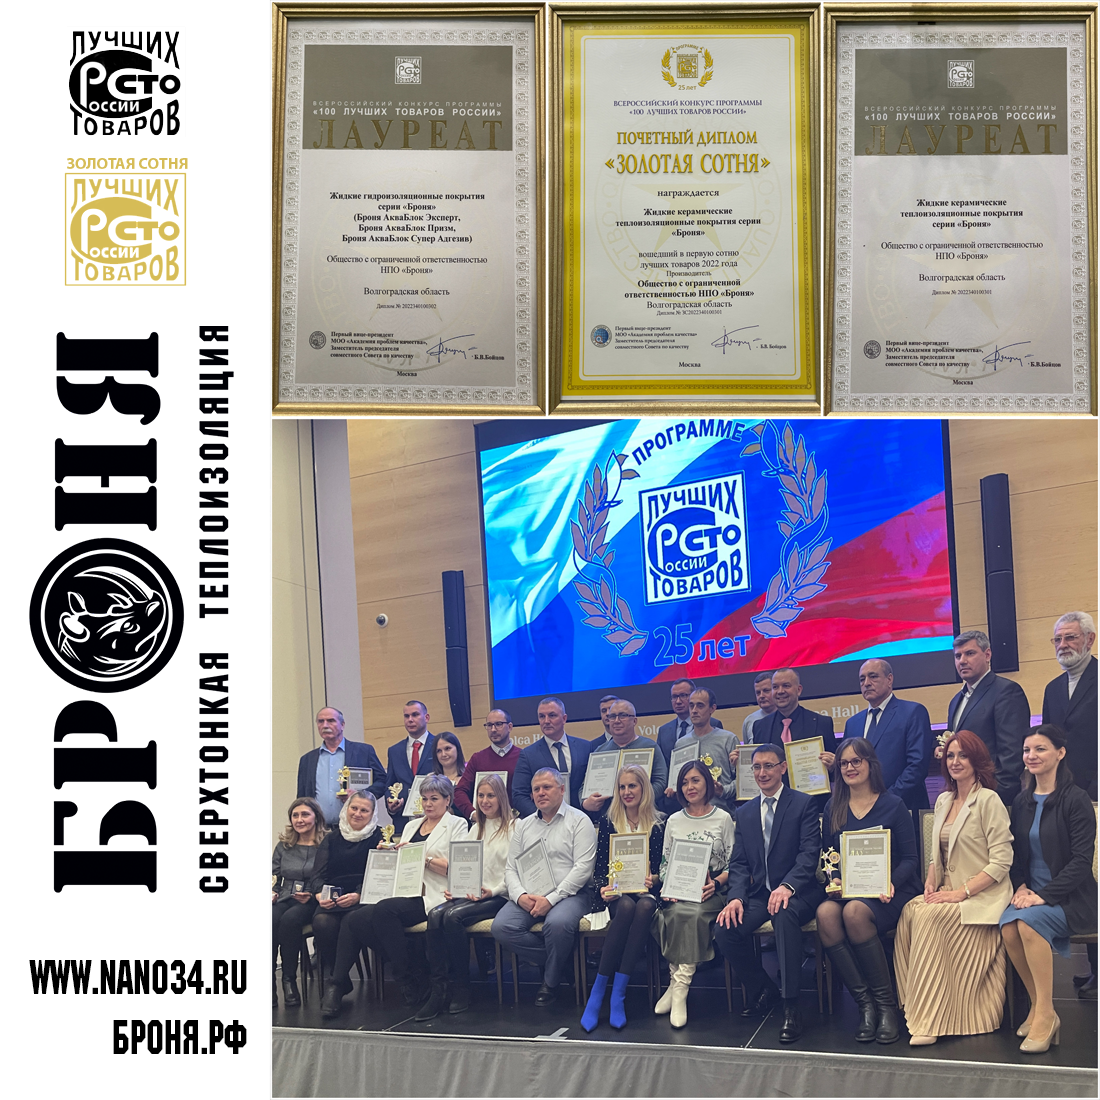 Important! Our BRONYA is the winner of the "100 Best Goods of Russia" for the eighth year in a row and the owner of the "Golden Hundred" for the third time